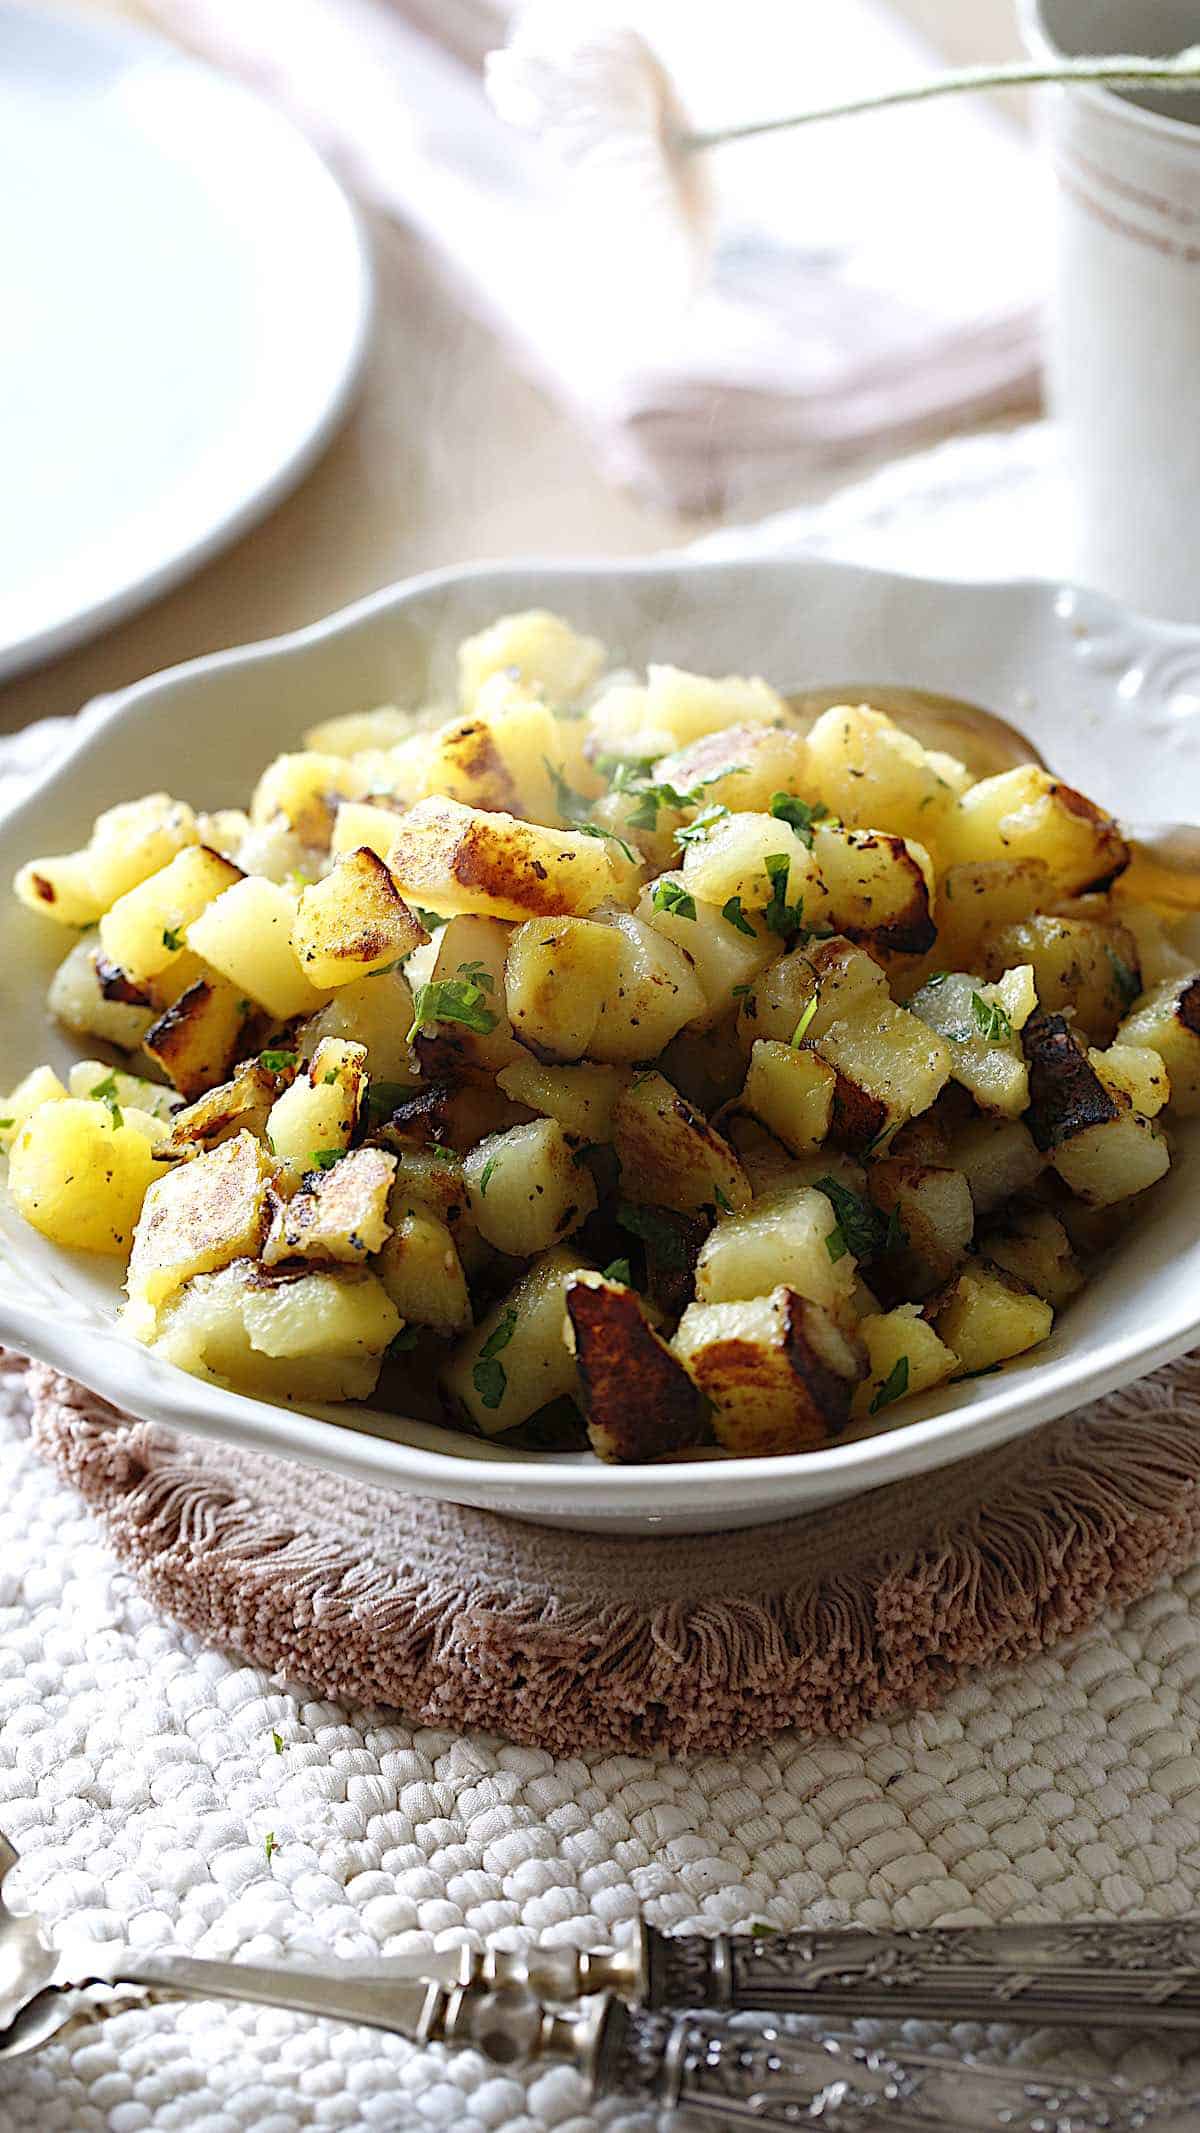 Home FRies in a white bowl on a table